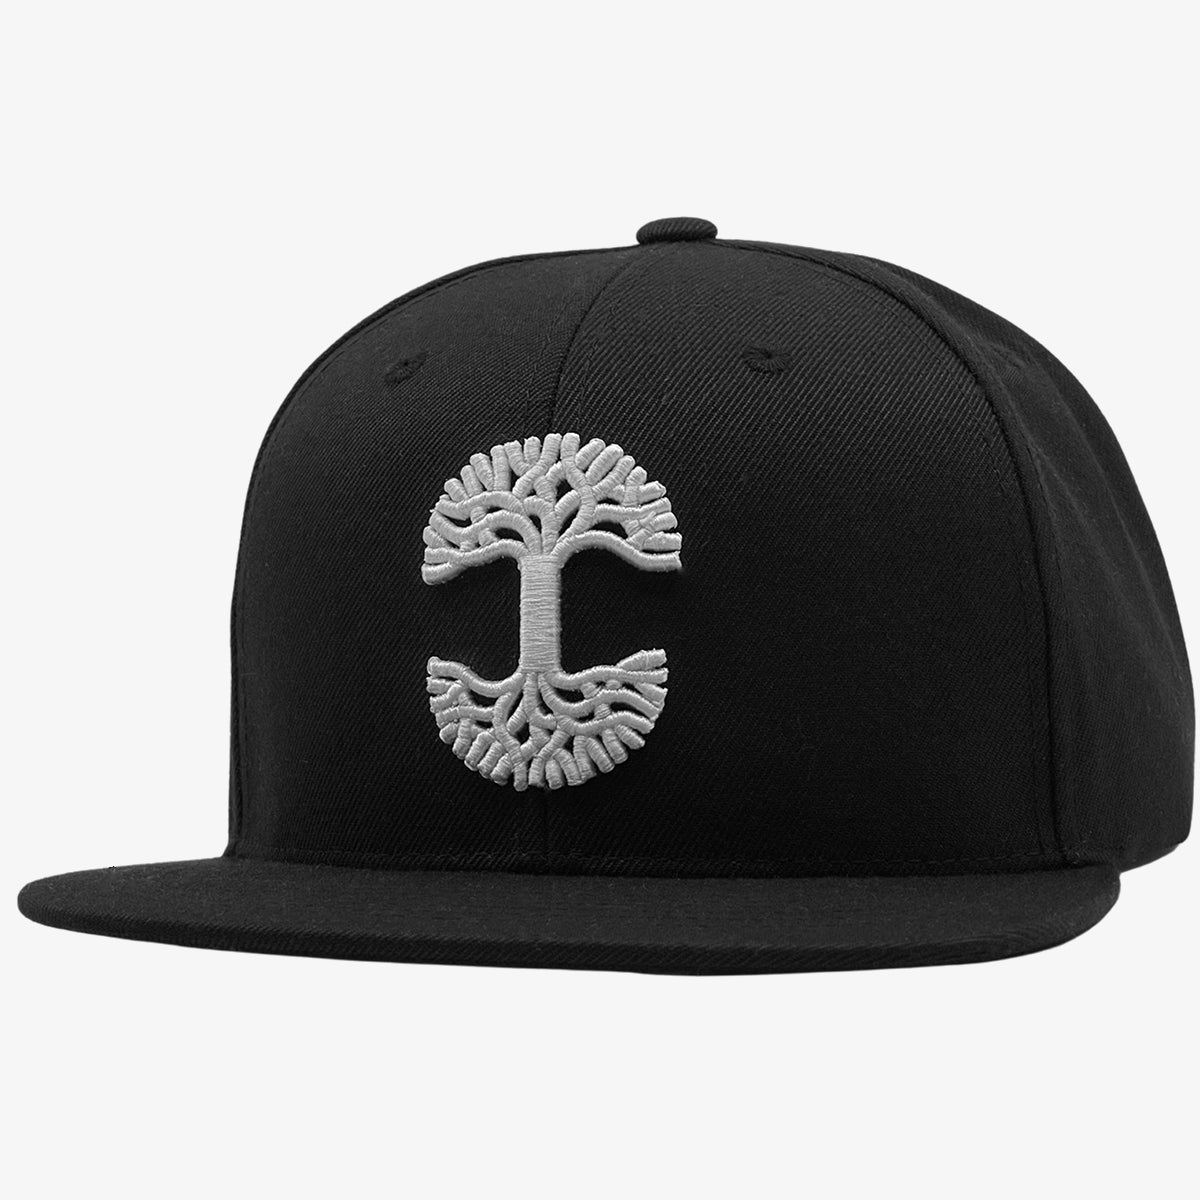 Black cap with silver embroidered Oaklandish tree logo on the front.